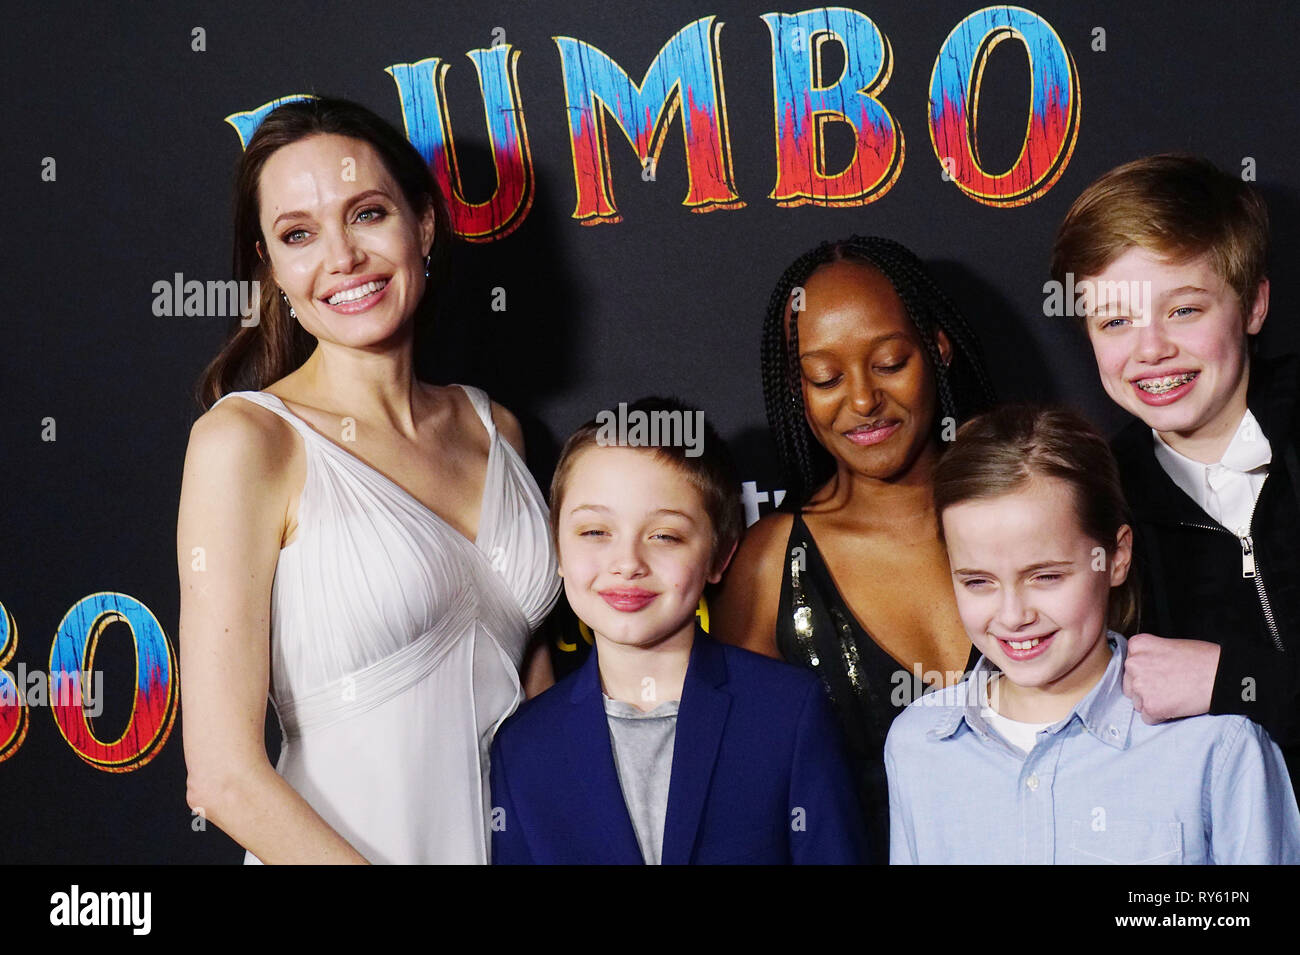 Hollywood, California, USA. 11th Mar, 2019. Angelina Jolie with her children Knox Jolie-Pitt and Zahara Marley Jolie-Pitt  026 attend the premiere of Disney s Dumbo at El Capitan Theatre on March 11, 2019 in Los Angeles, California. Credit: Tsuni / USA/Alamy Live News Stock Photo